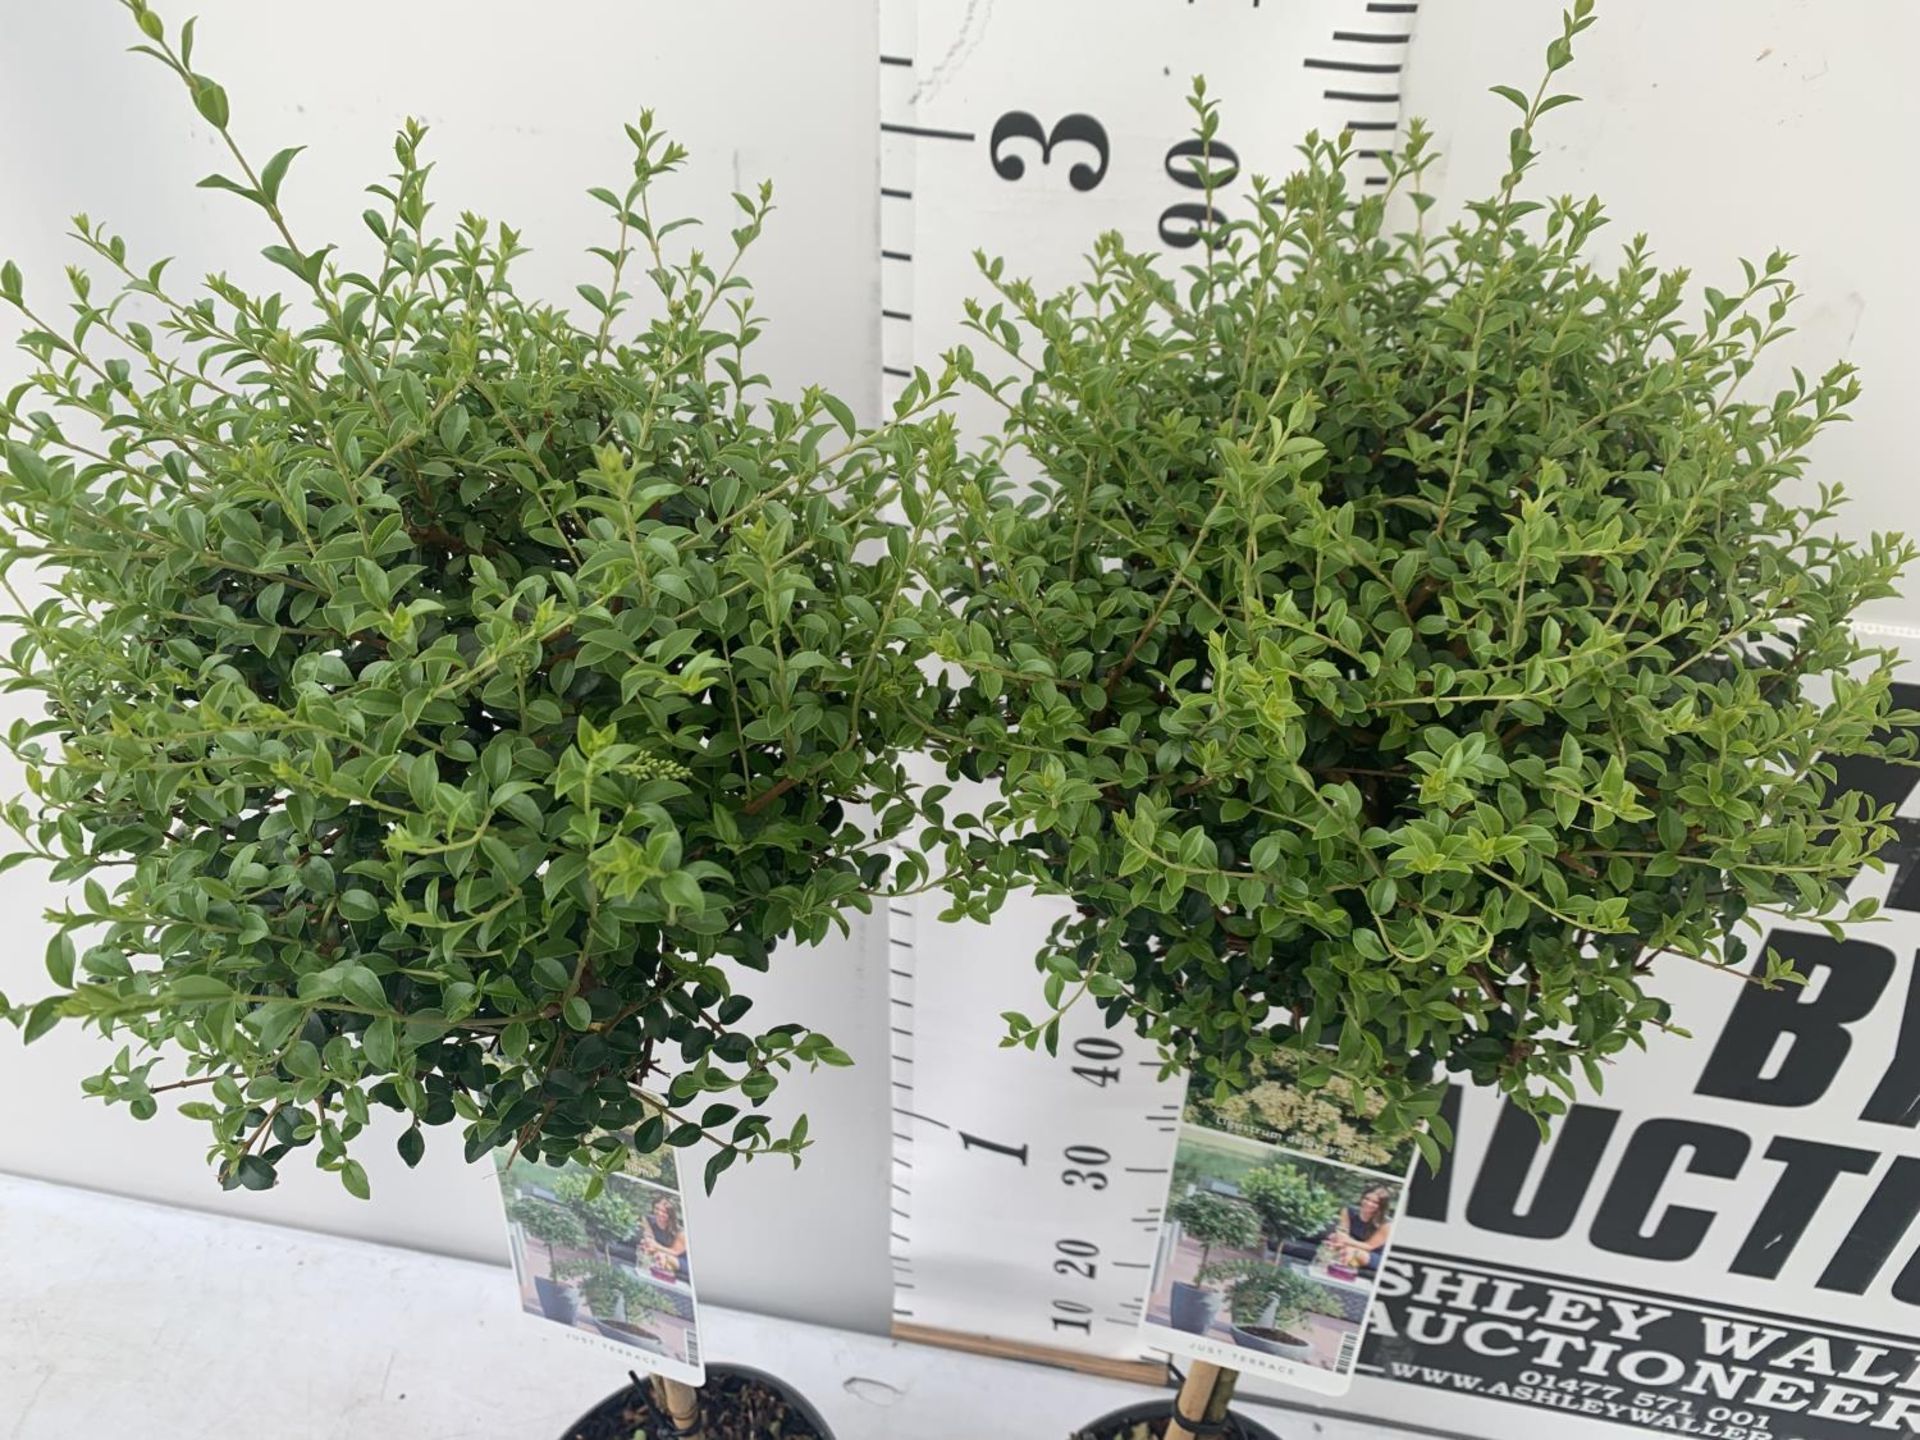 TWO LIGUSTRUM DELAVAYANUM STANDARD TREES APPROX 100CM IN HEIGHT IN 3LTR POTS PLUS VAT TO BE SOLD FOR - Image 3 of 5